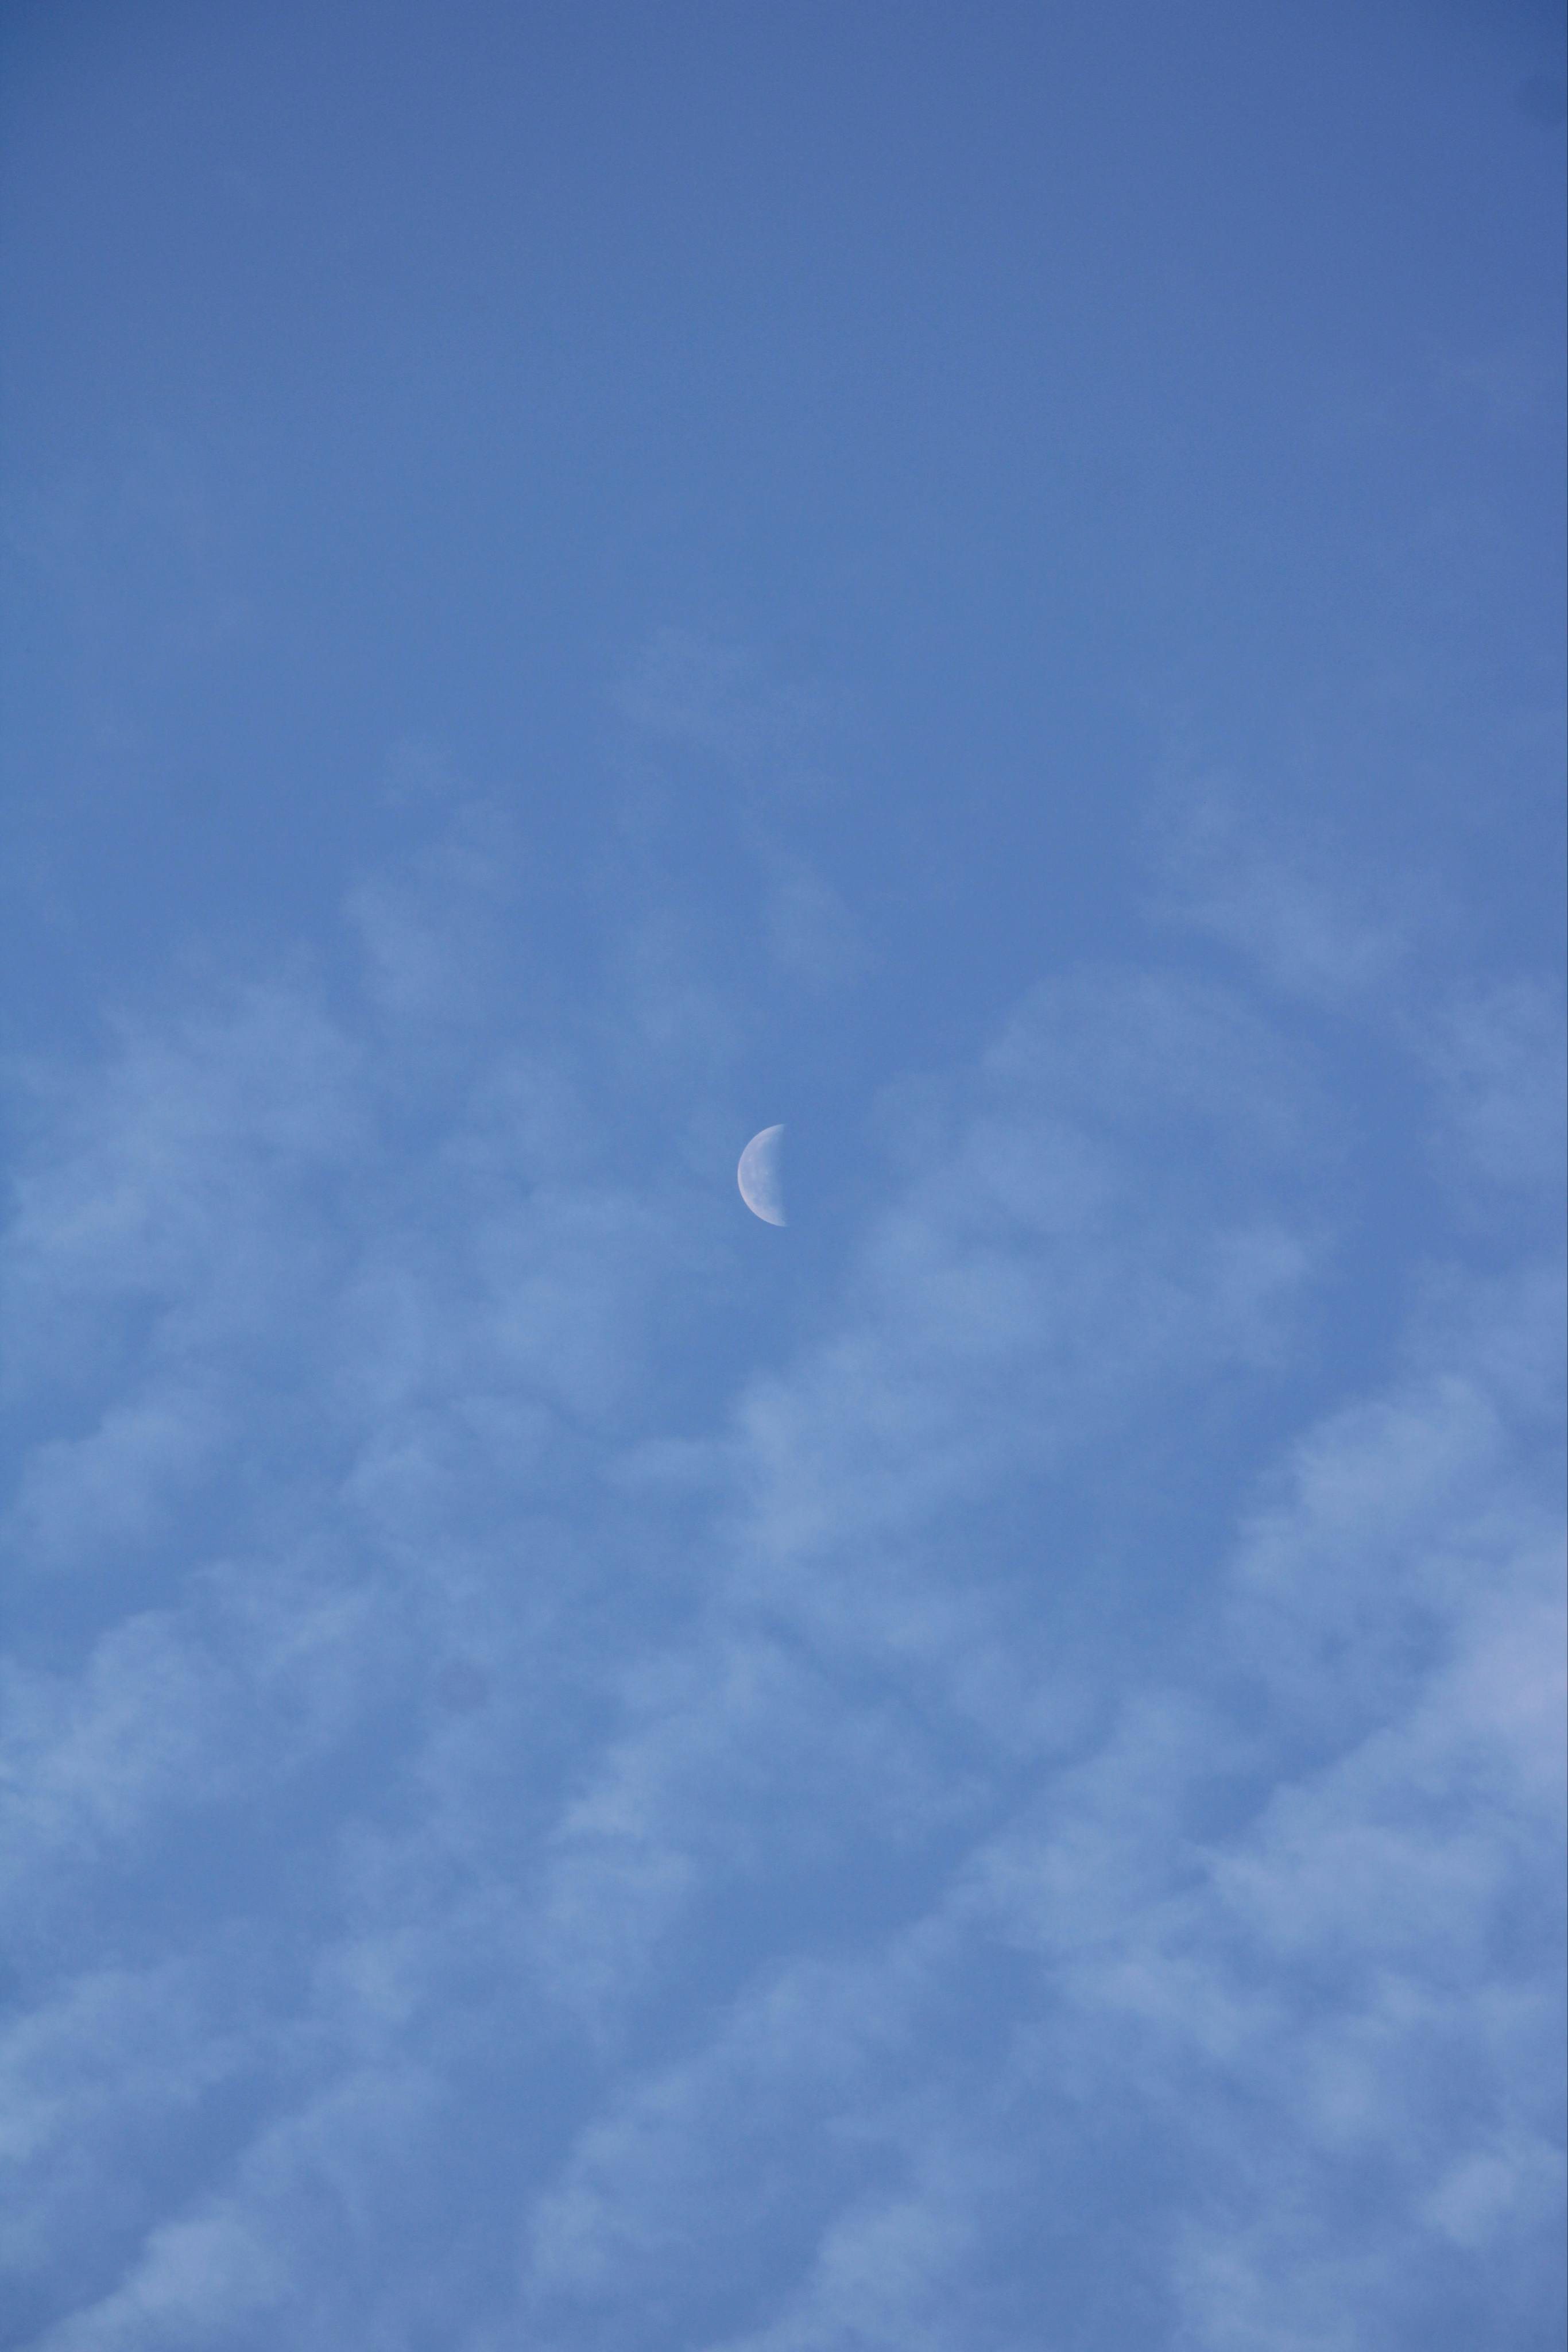 A Crescent Moon on Blue Sky at Twilight · Free Stock Photo